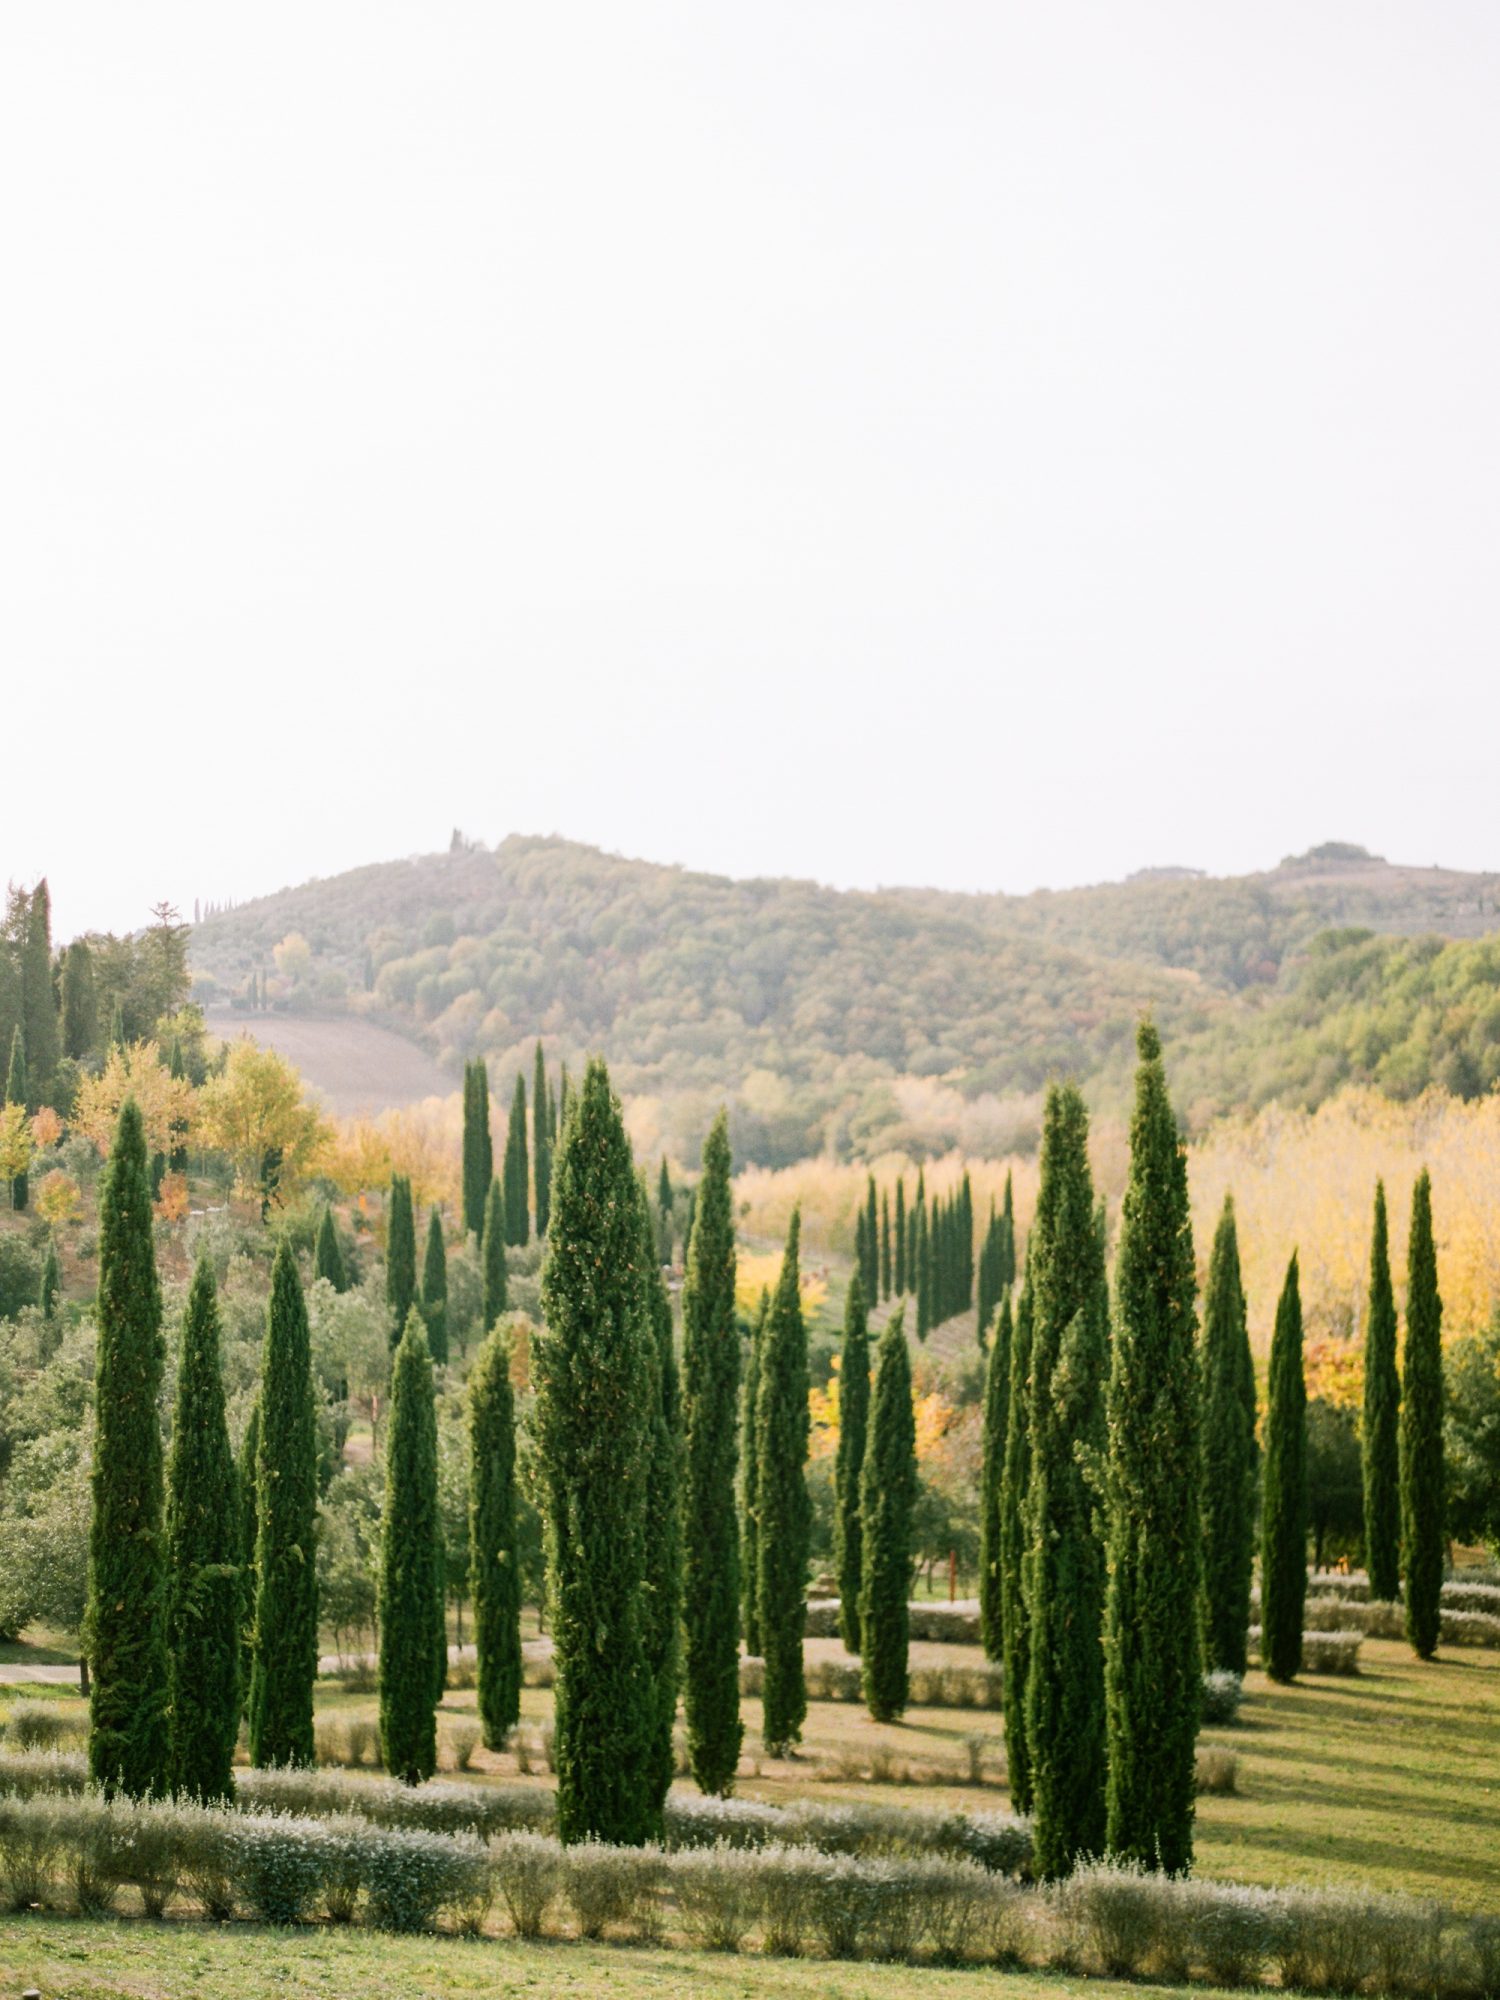 Cypress trees in Tuscany. Photo by Rachel Havel